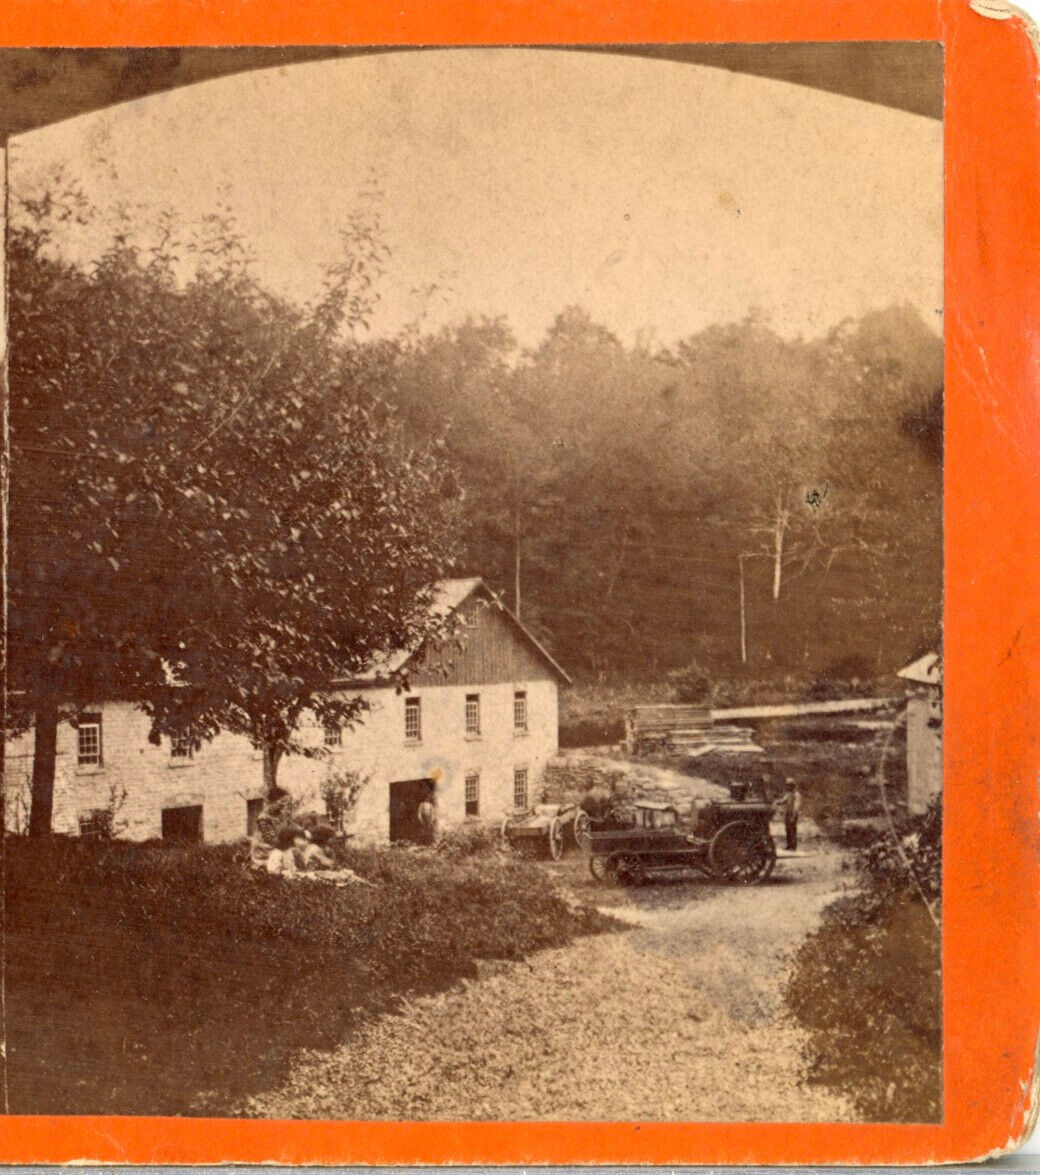 NEW YORK, Farm House, Old Tractor, Maybe Newport, N.Y. ?--Stereoview B43